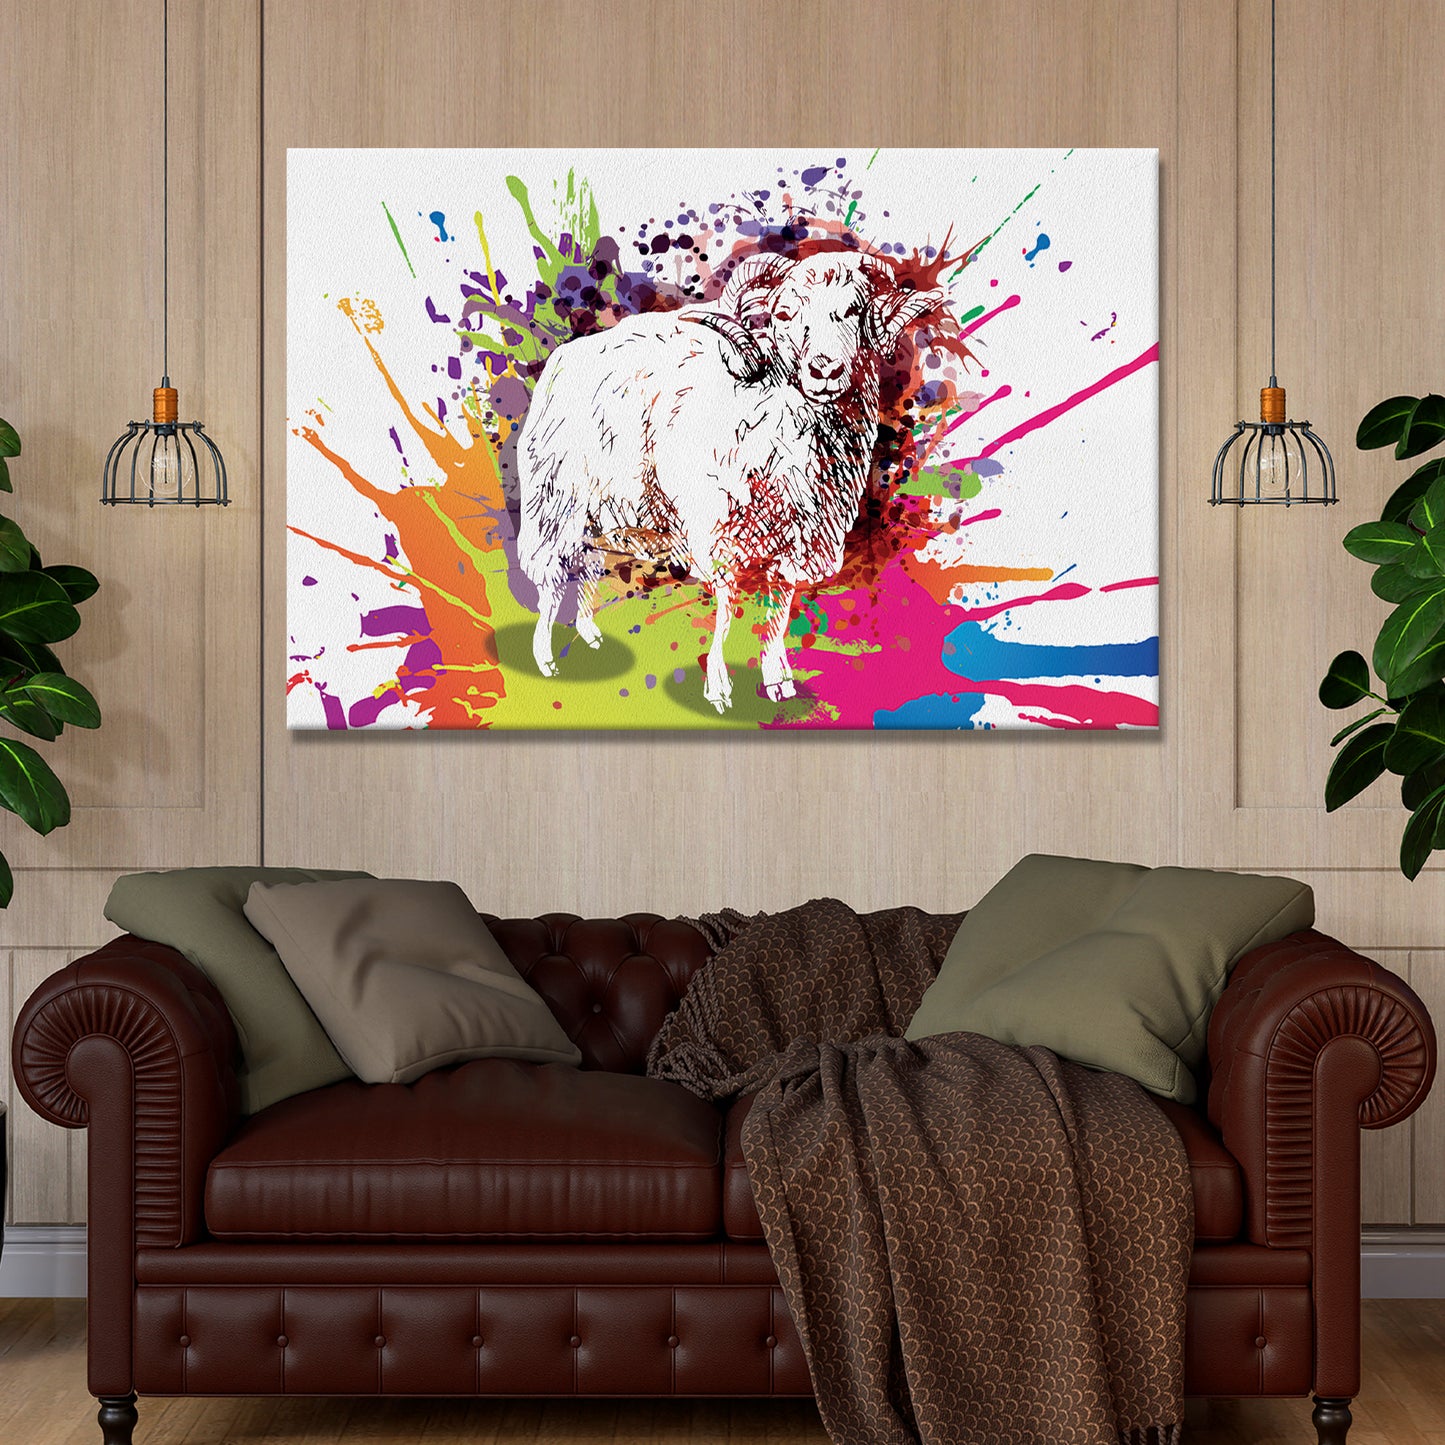 Big Horned Sheep Paint Splash Canvas Wall Art - Image by Tailored Canvases